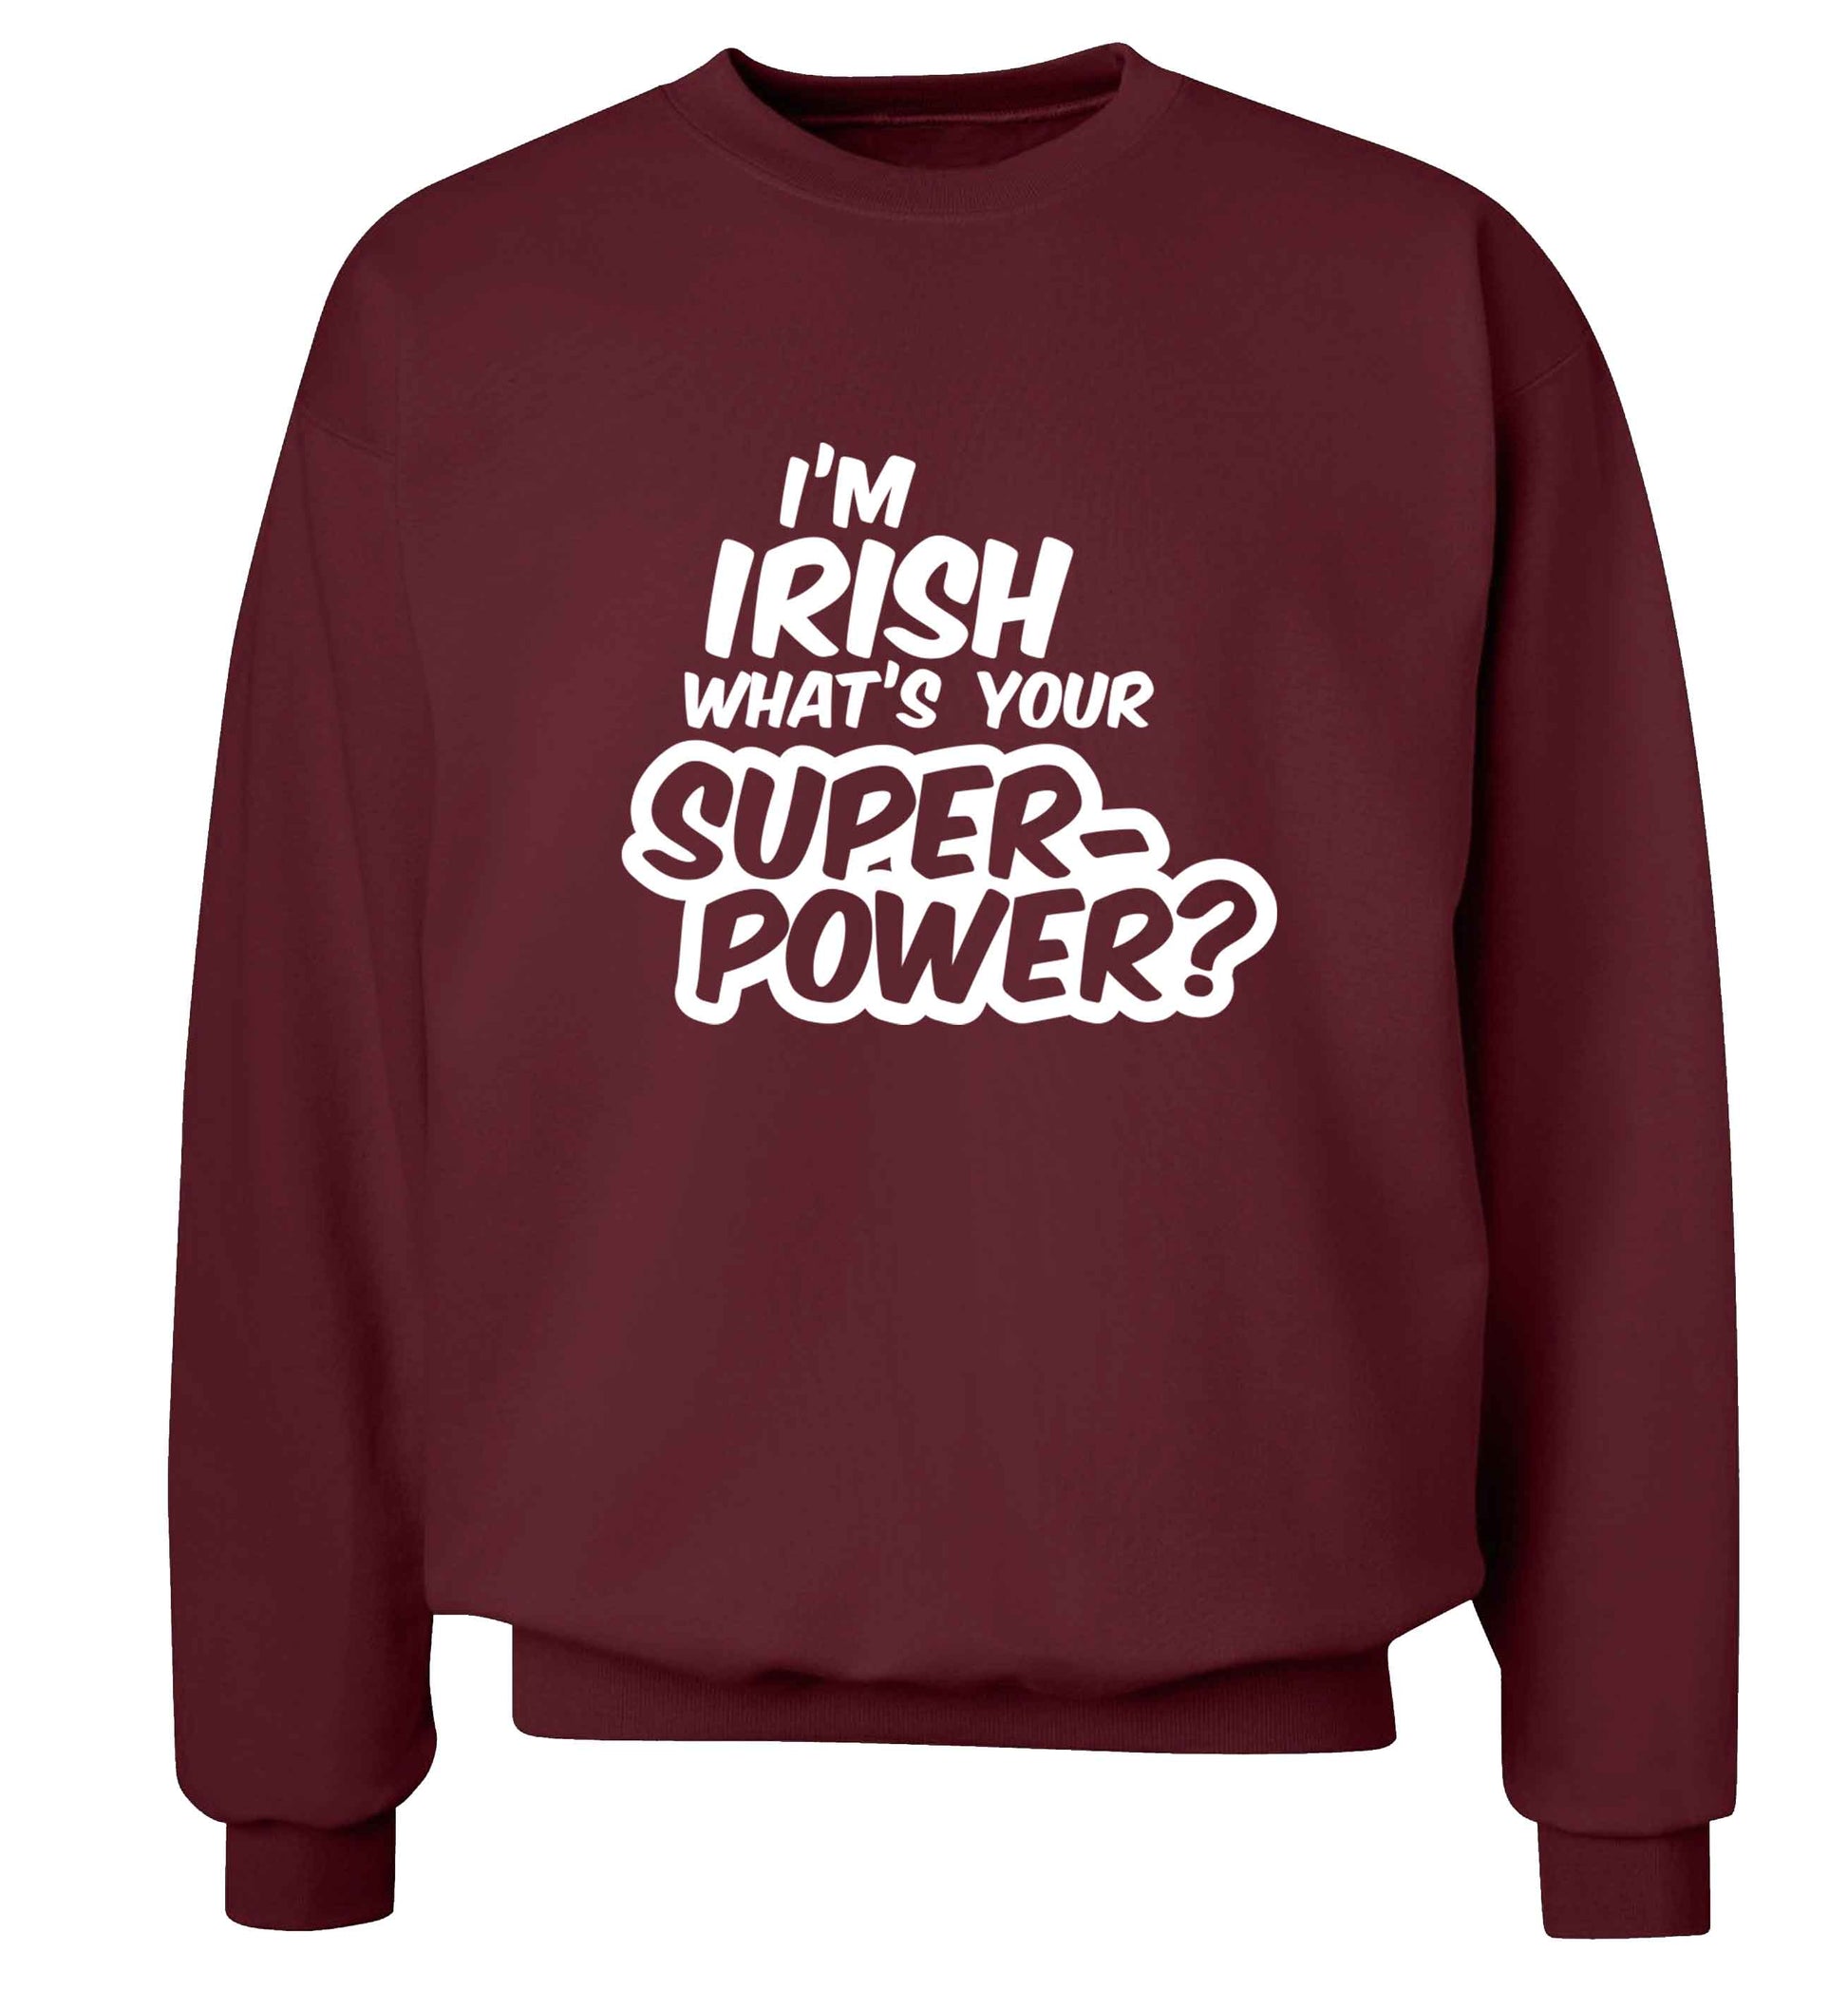 I'm Irish what's your superpower? adult's unisex maroon sweater 2XL